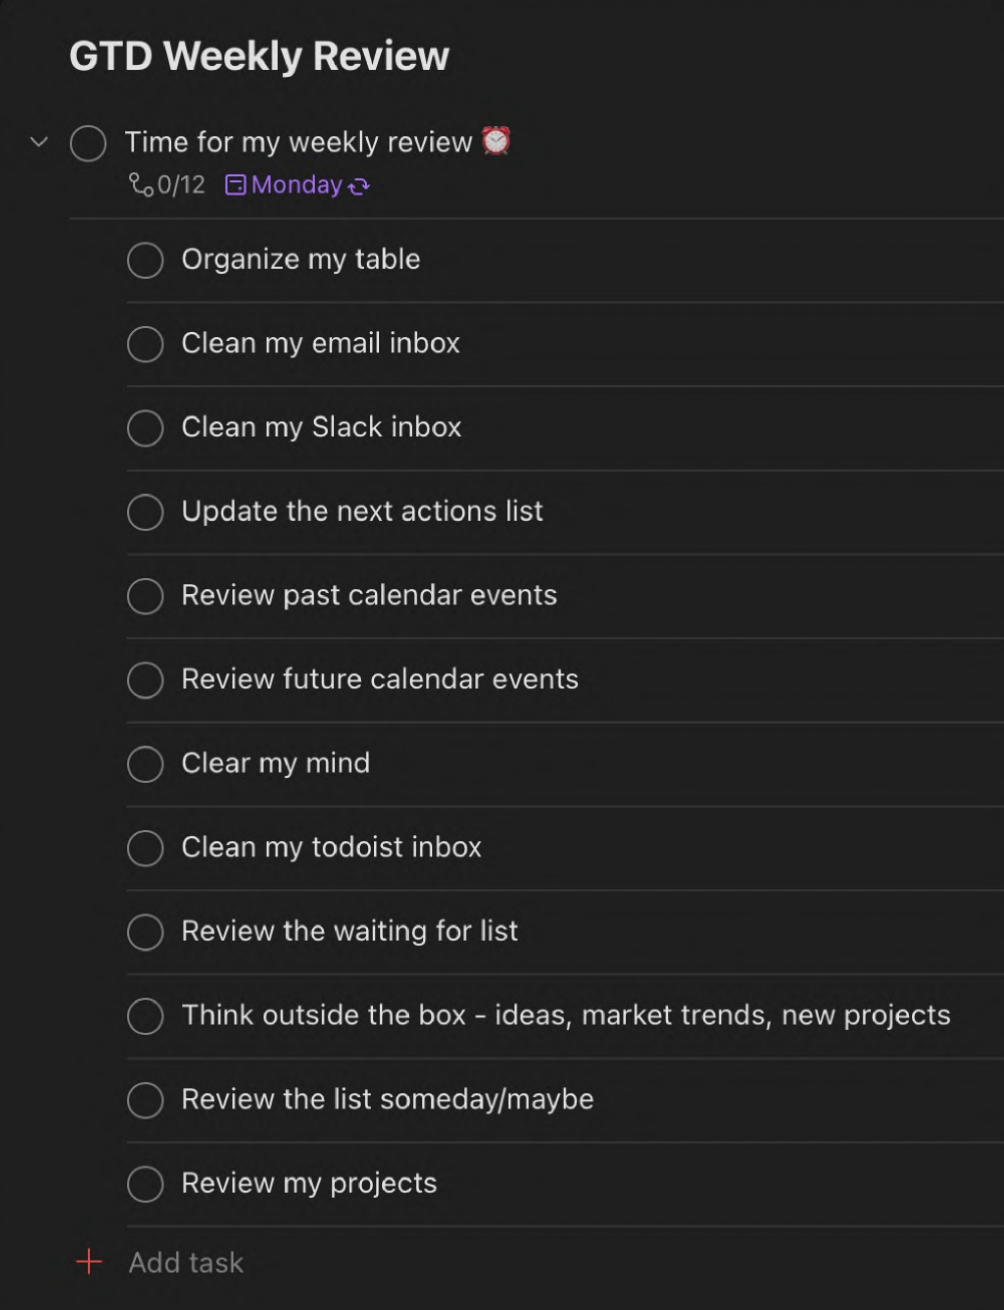 A list of tasks under the title "GTD Weekly Review"